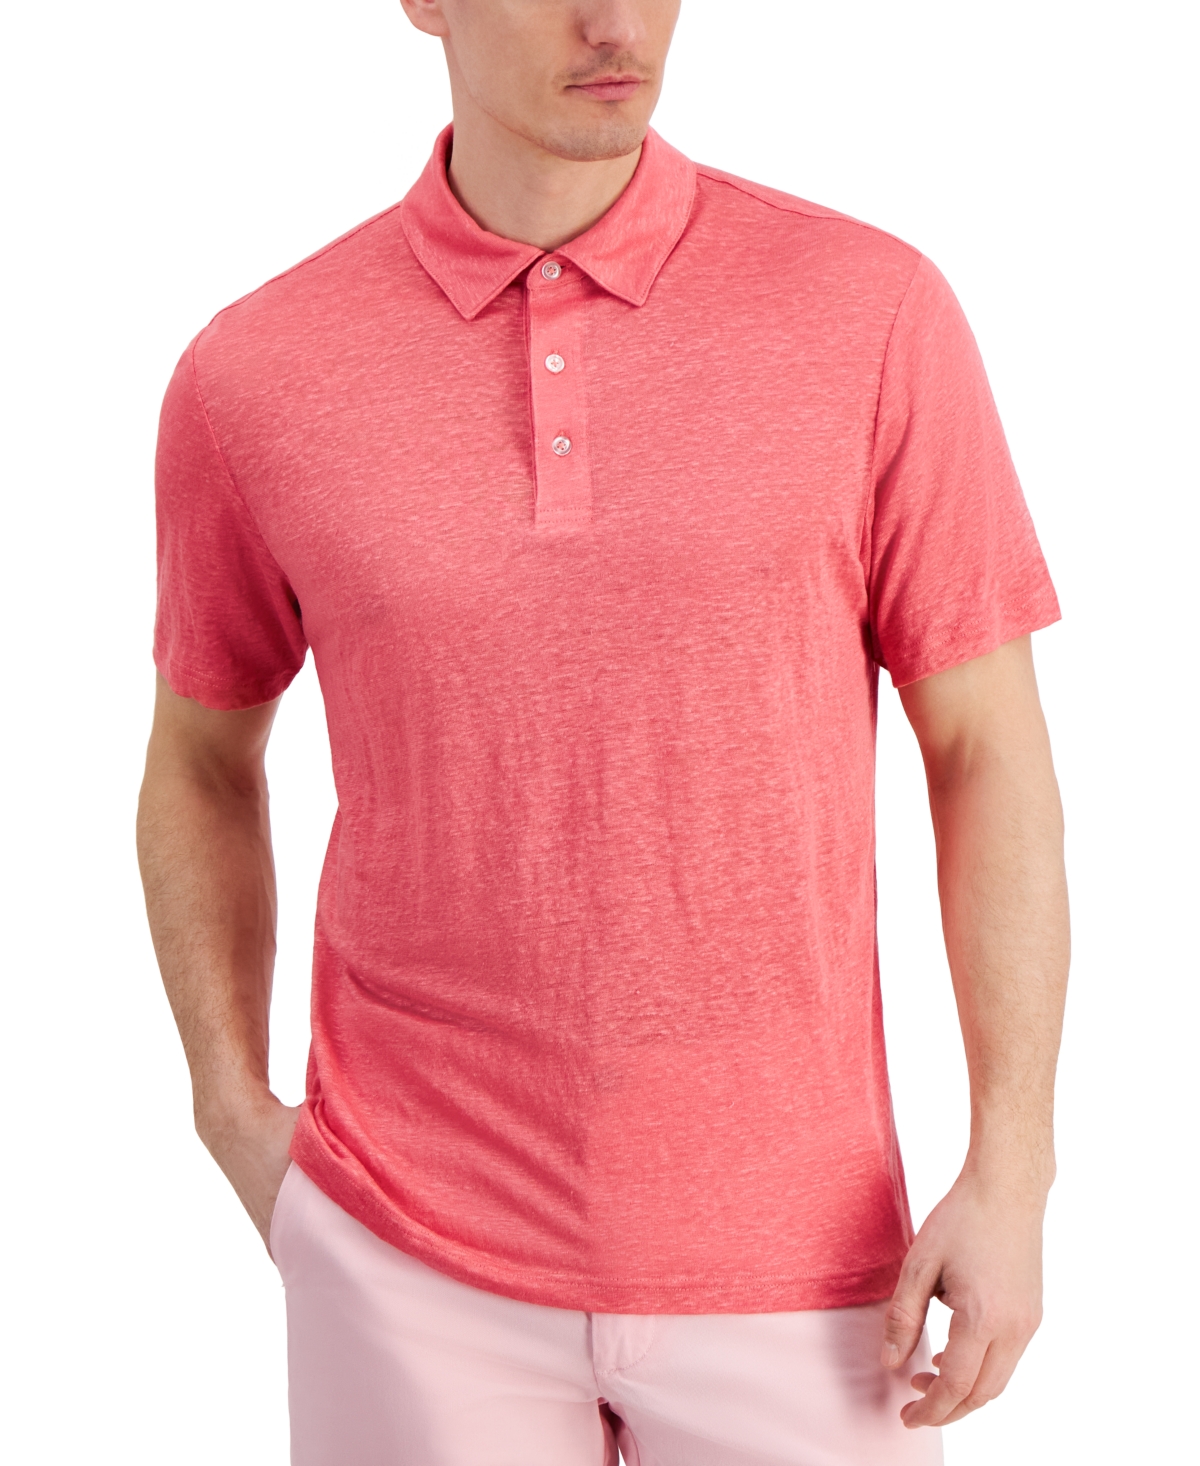 Men's Luxury Short Sleeve Heathered Polo Shirt, Created for Macy's - Antique Coral